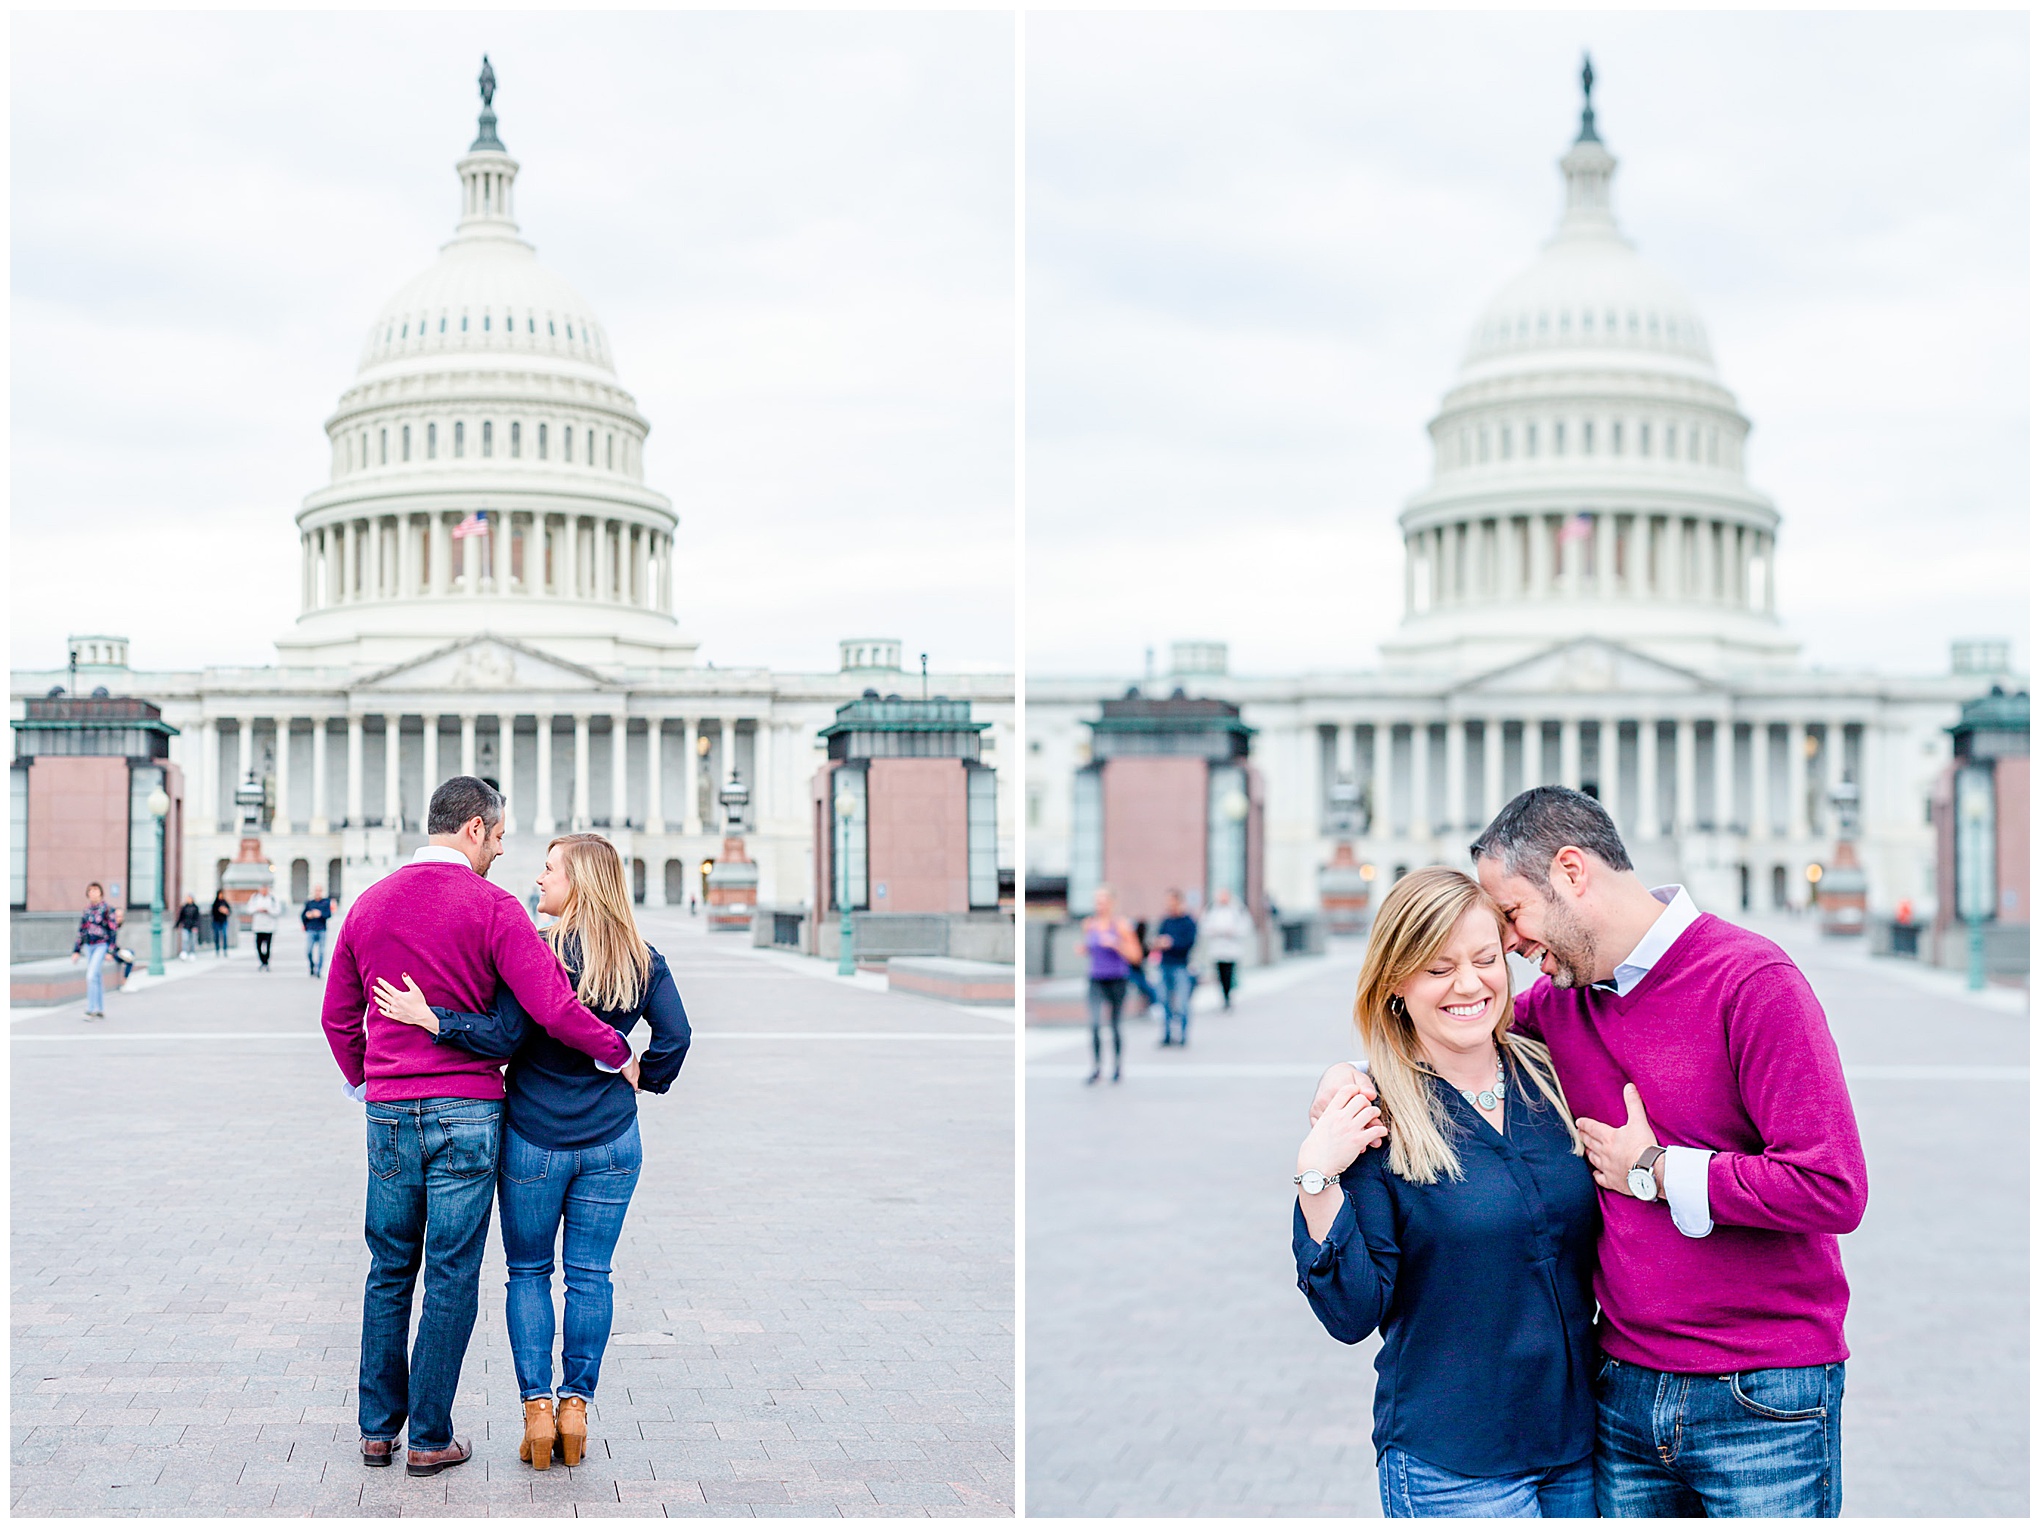 casual Capitol Hill engagement photos, engagement photos, Capitol Hill D.C., D.C. engagement photos, D.C. wedding photographer, D.C. engagement photographer, Rachel E.H. Photography, autumn engagement photos, casual engagement sessioon outfits, engagement session outfits, engaged couple, D.C. couple, Capitol dome